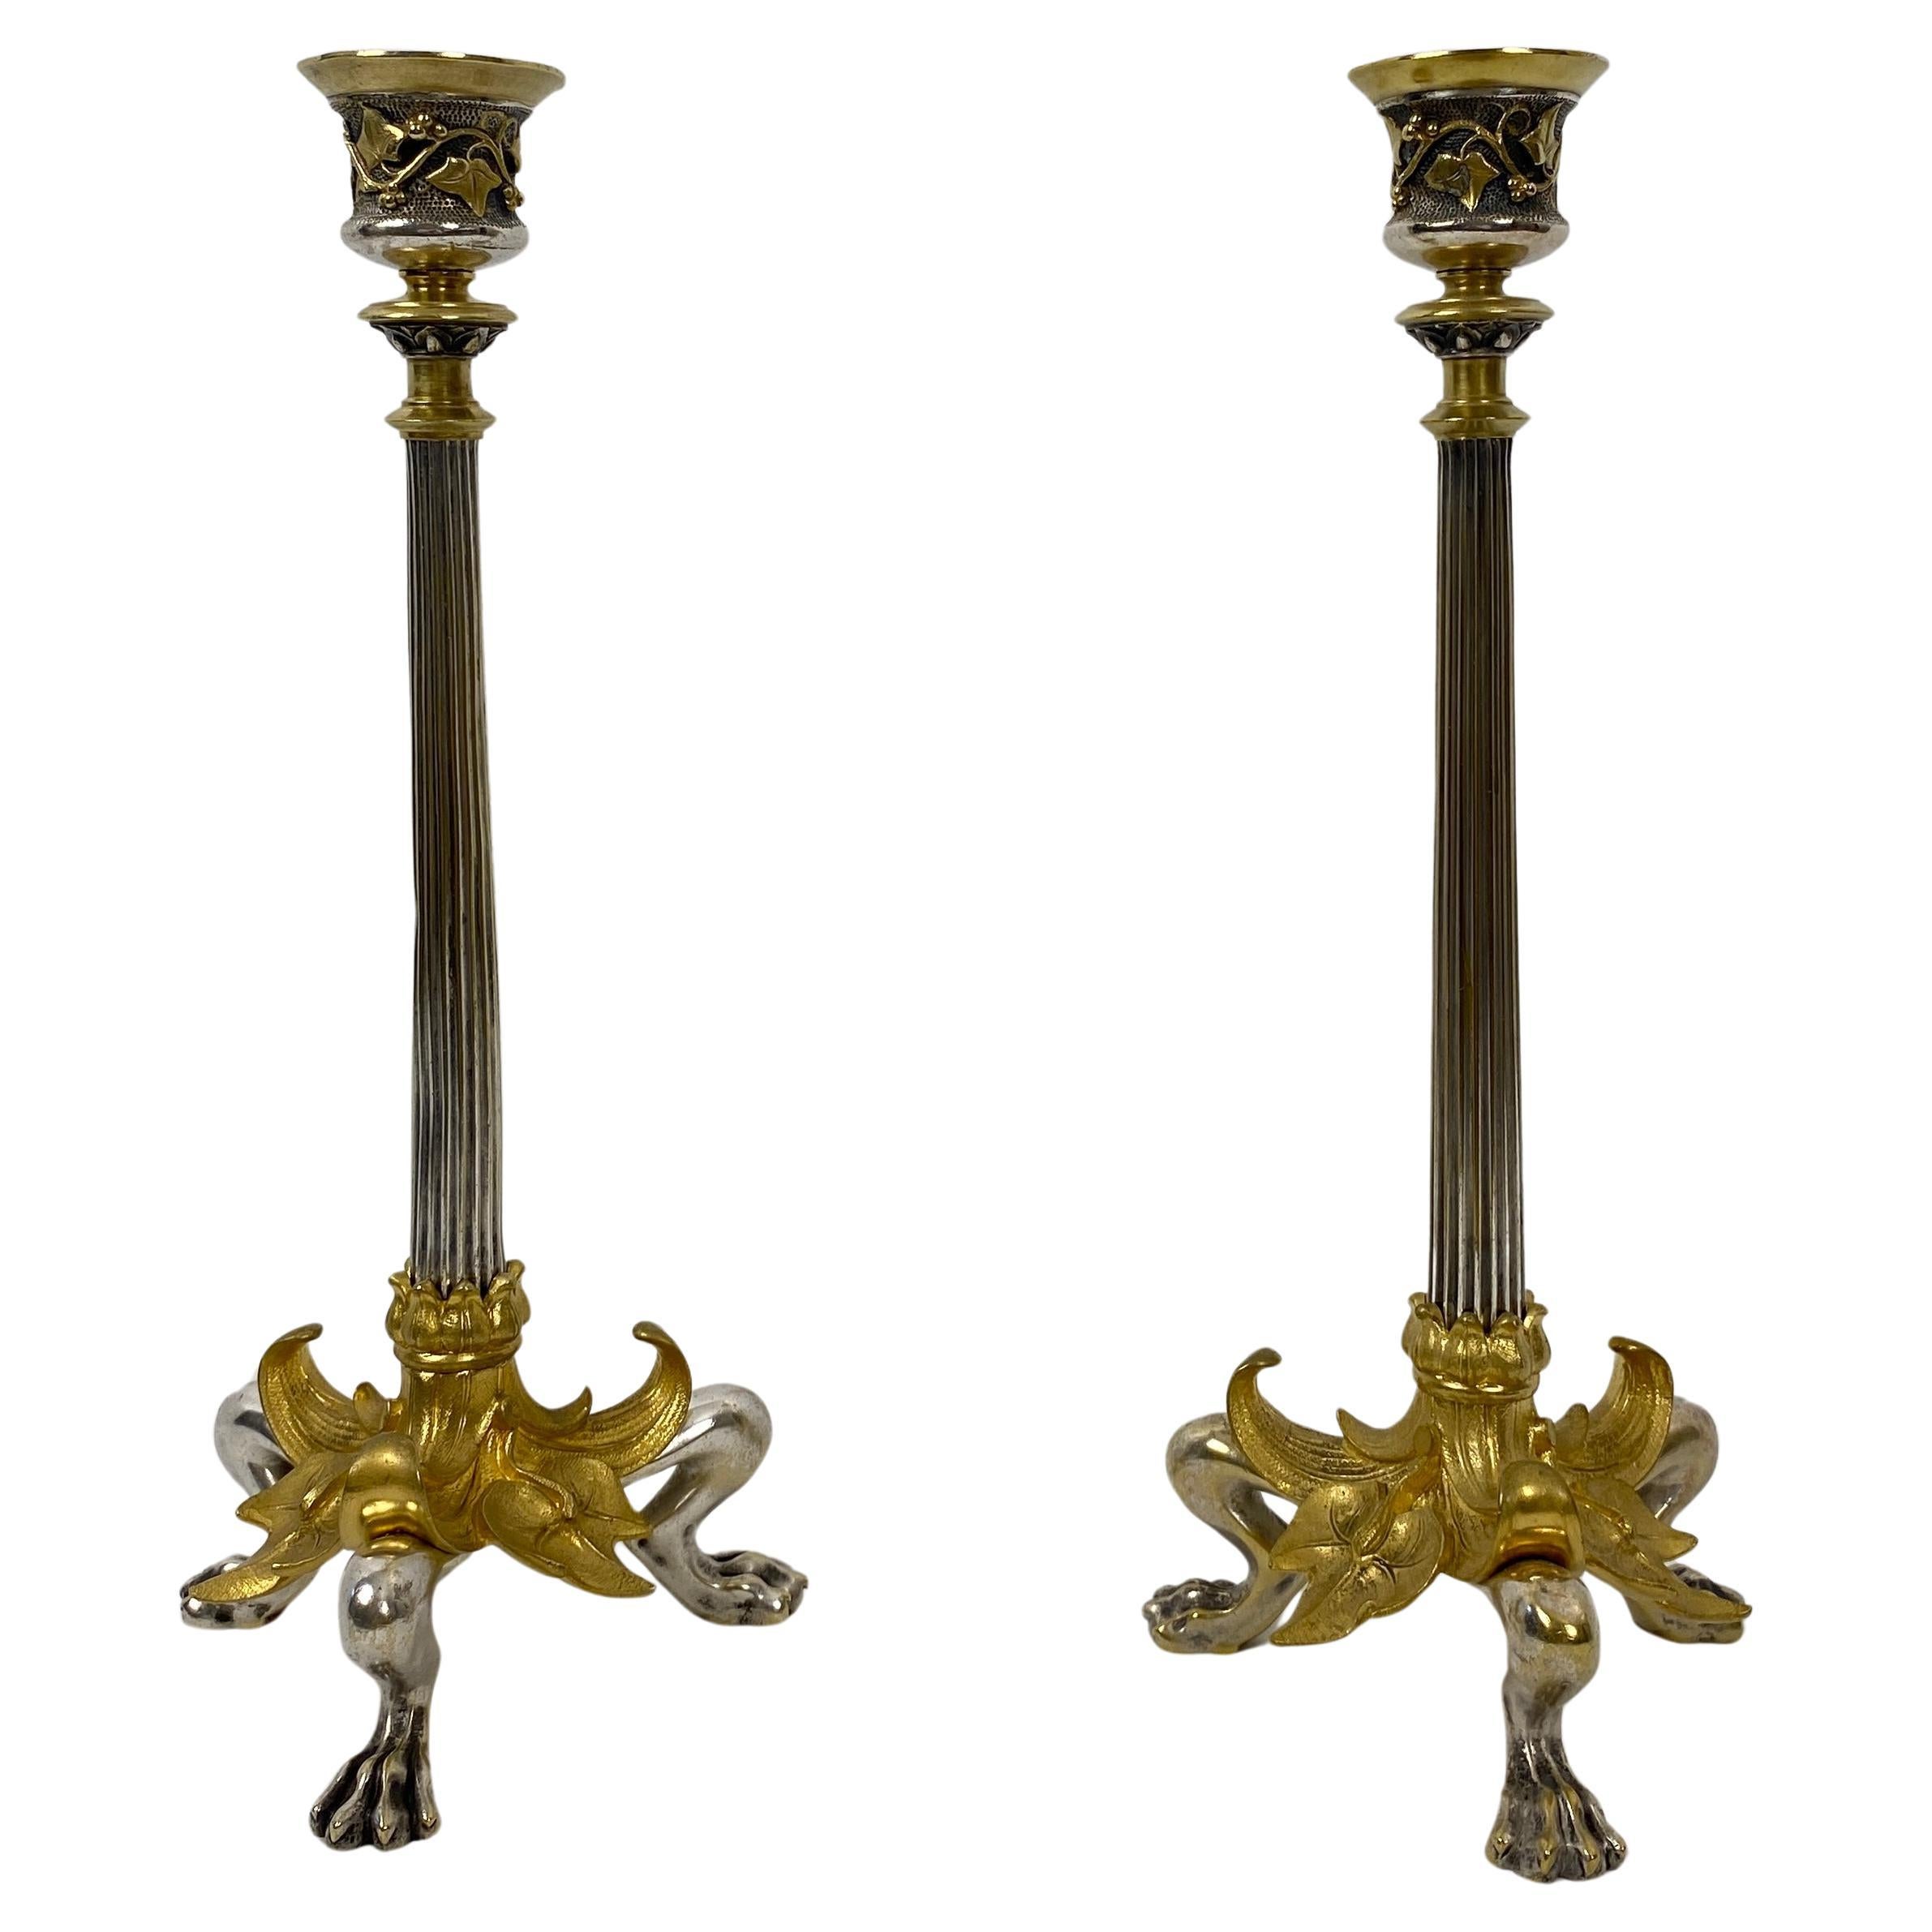 Pair of French Empire Gilt Bronze Candlesticks with Hoofed Faun Feet, circa 1890